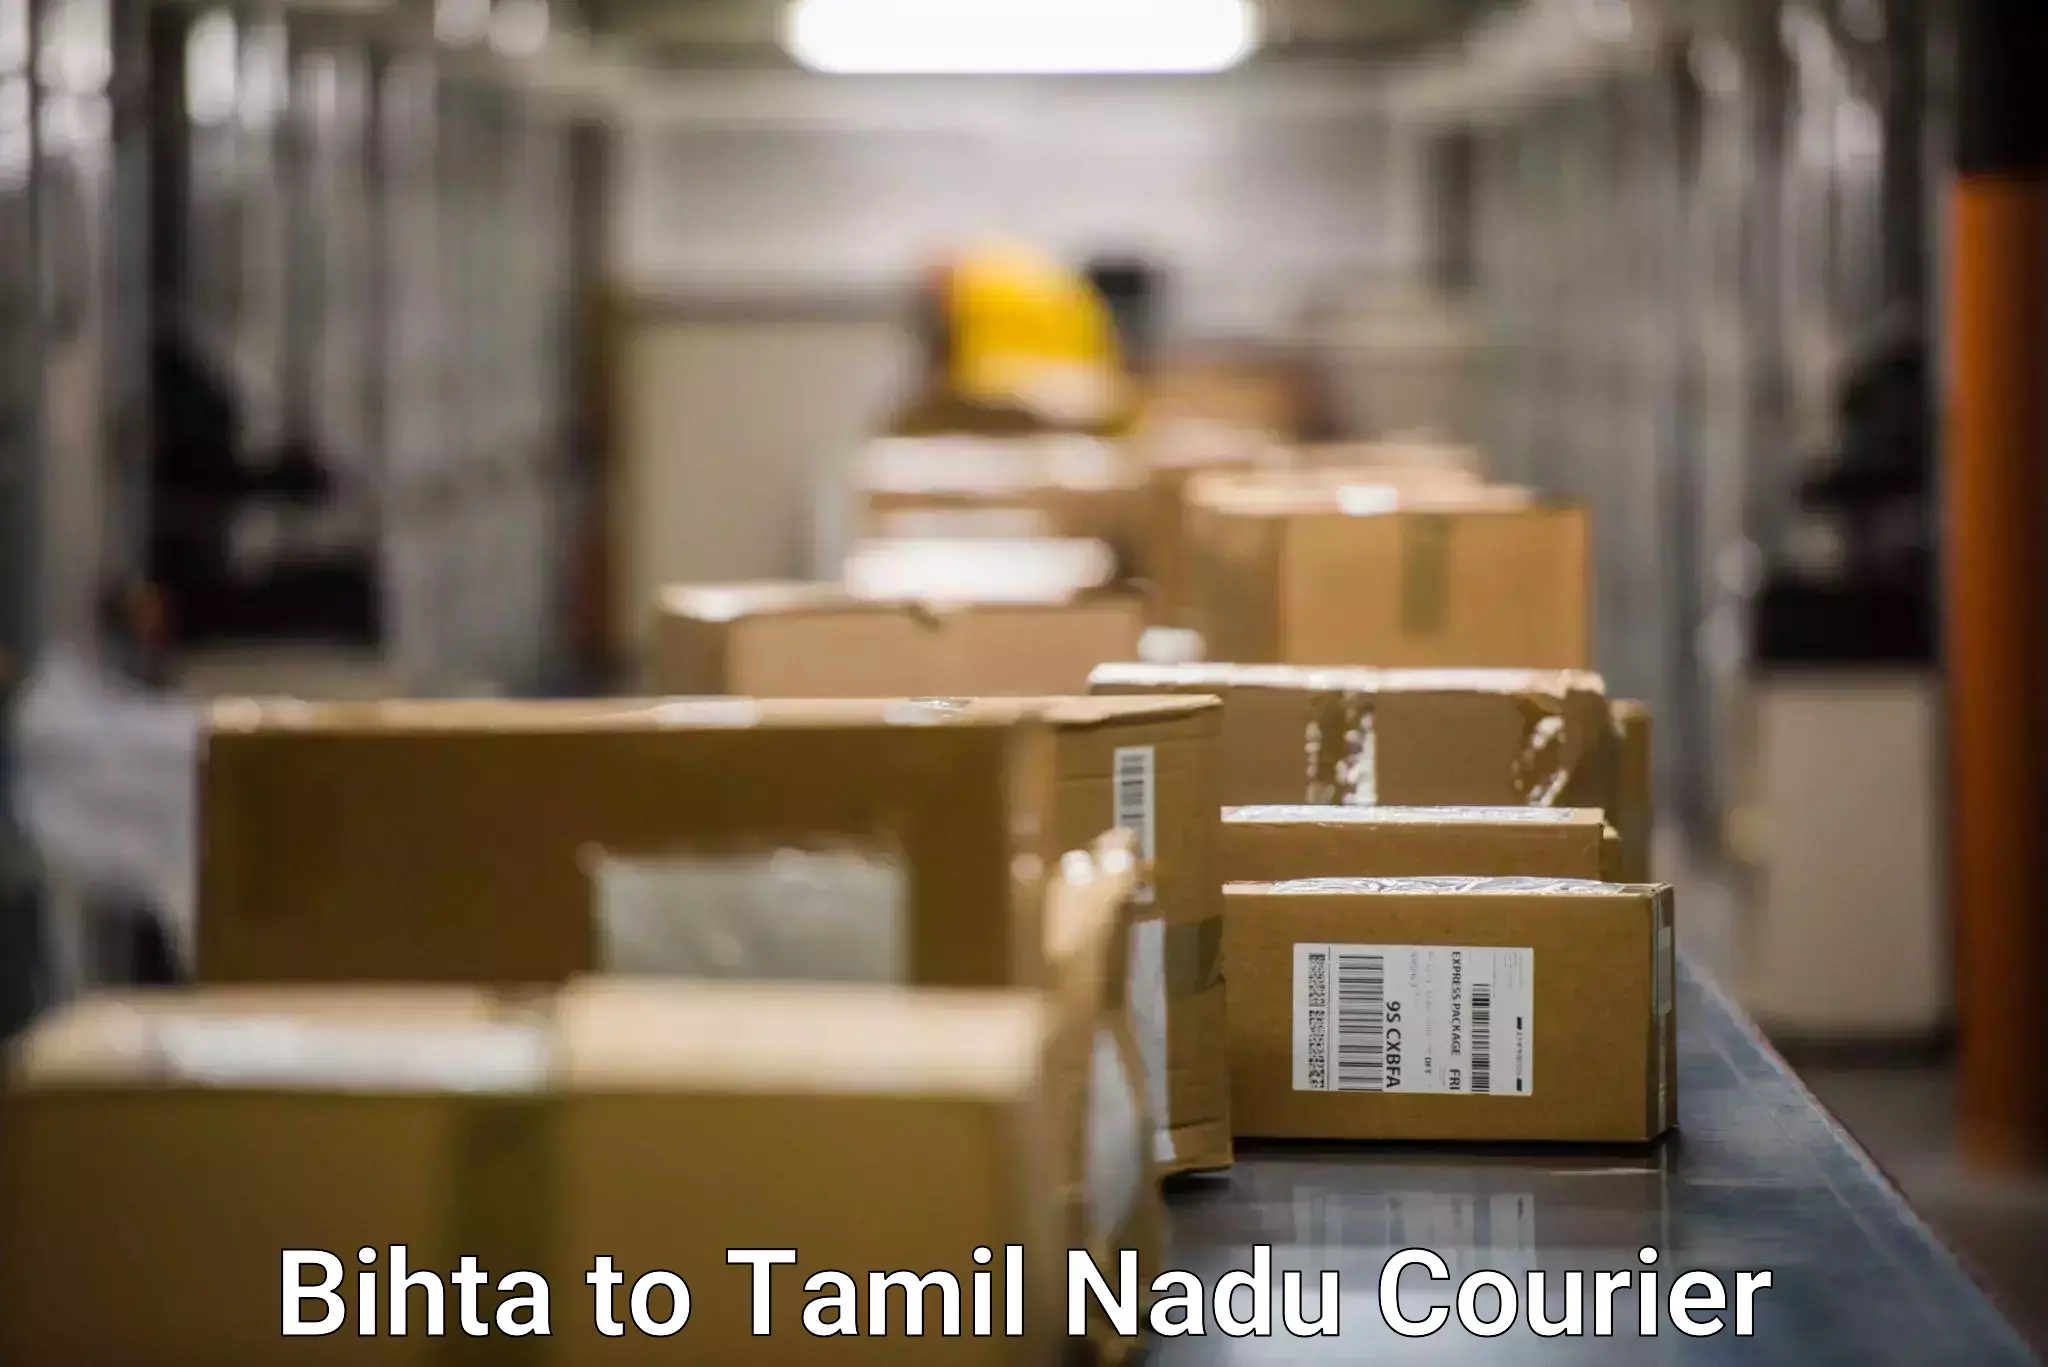 Tailored shipping plans Bihta to Vellore